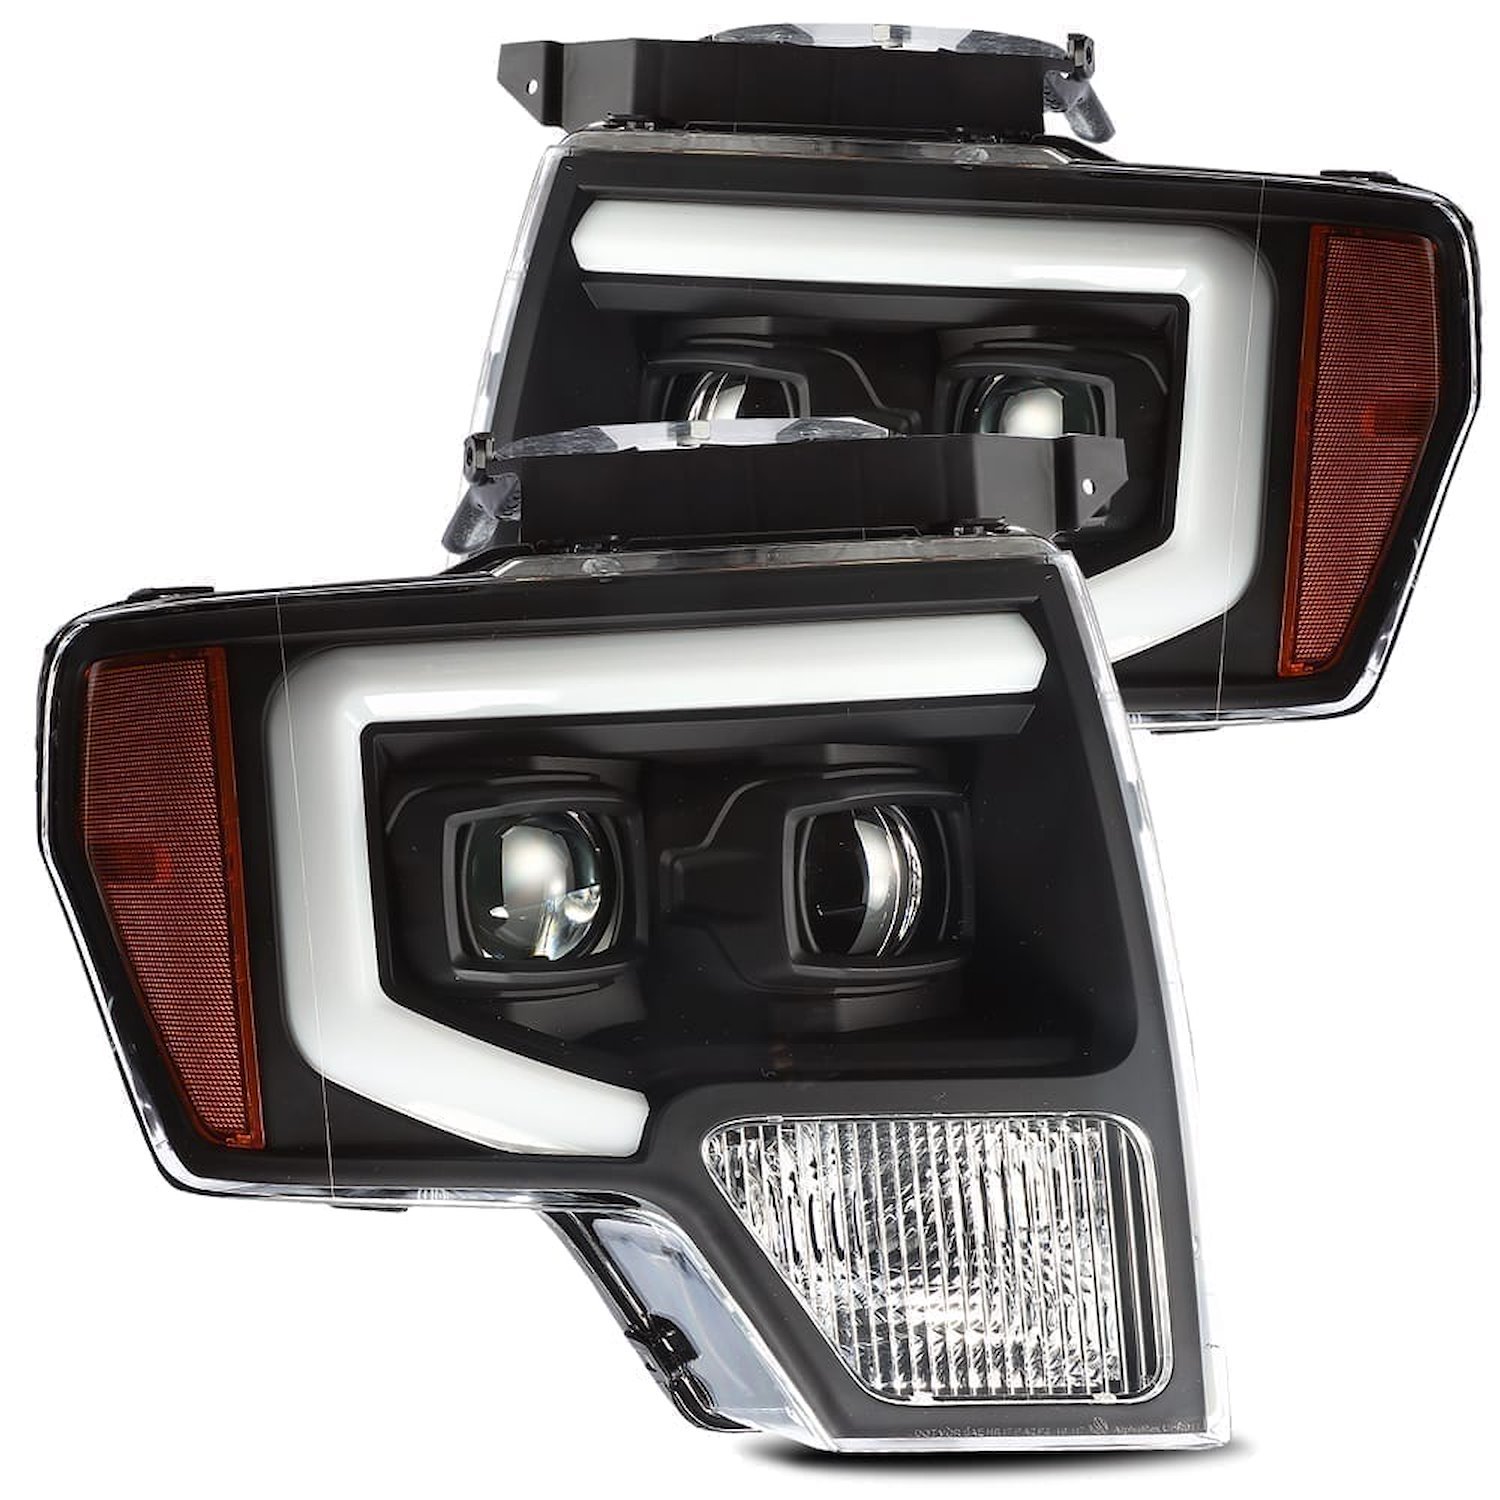 880179 Luxx-Series LED Projector Headlights for 2009-2014 Ford F-150 - Black